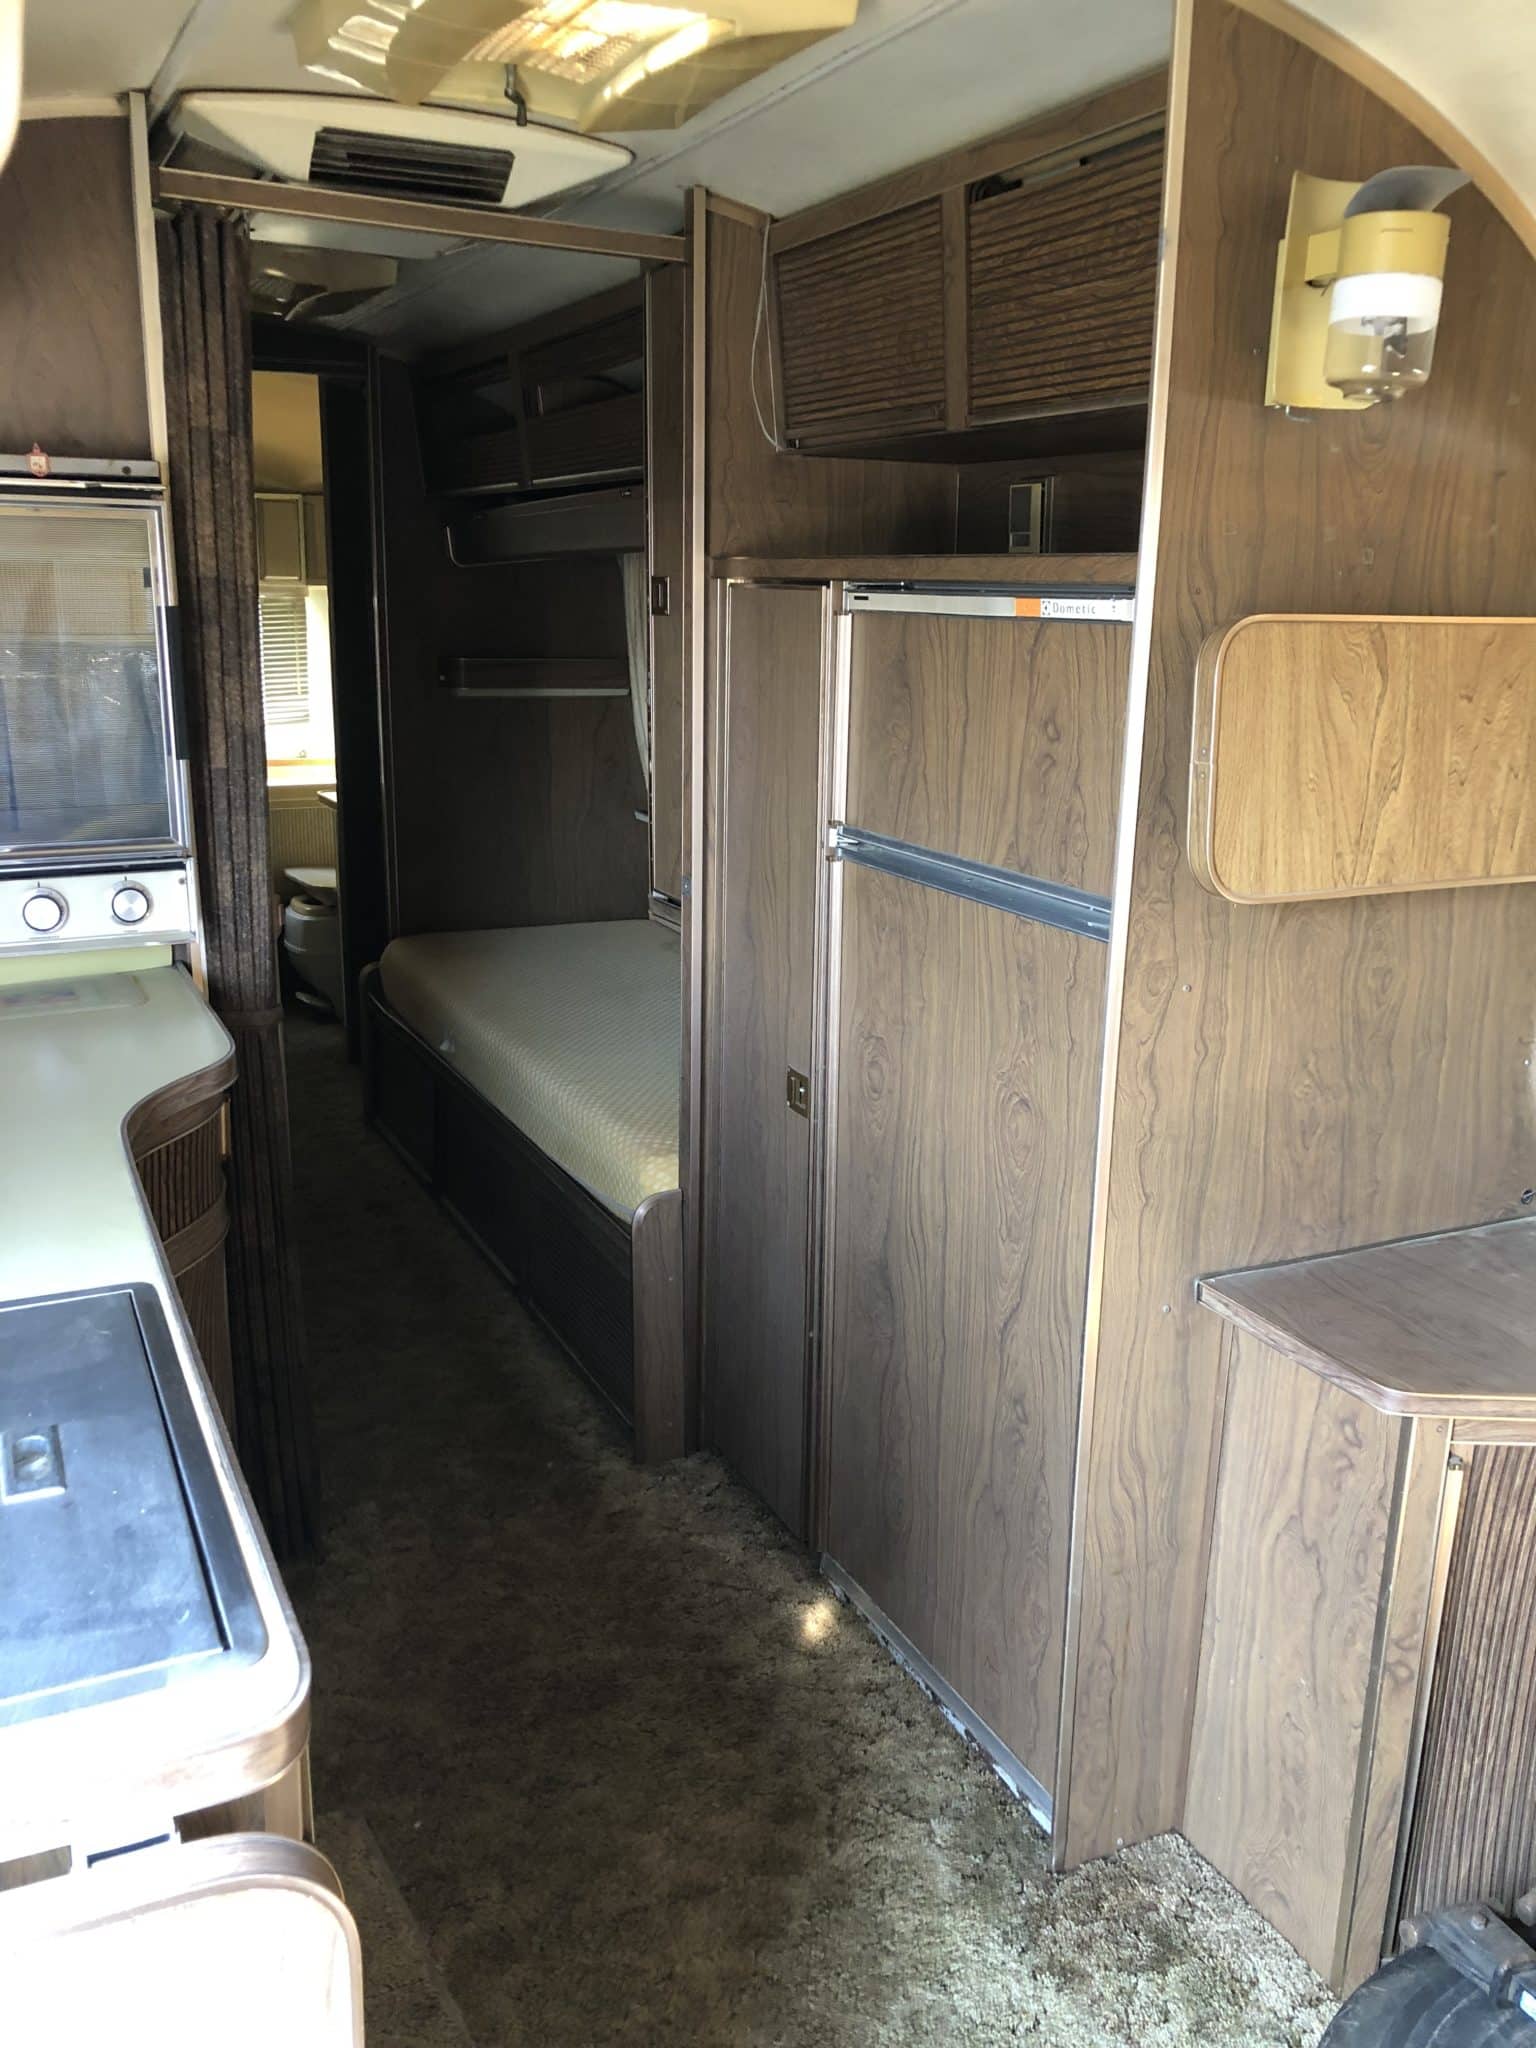 1973 Airstream 29FT International For Sale in Fresno - Airstream ...